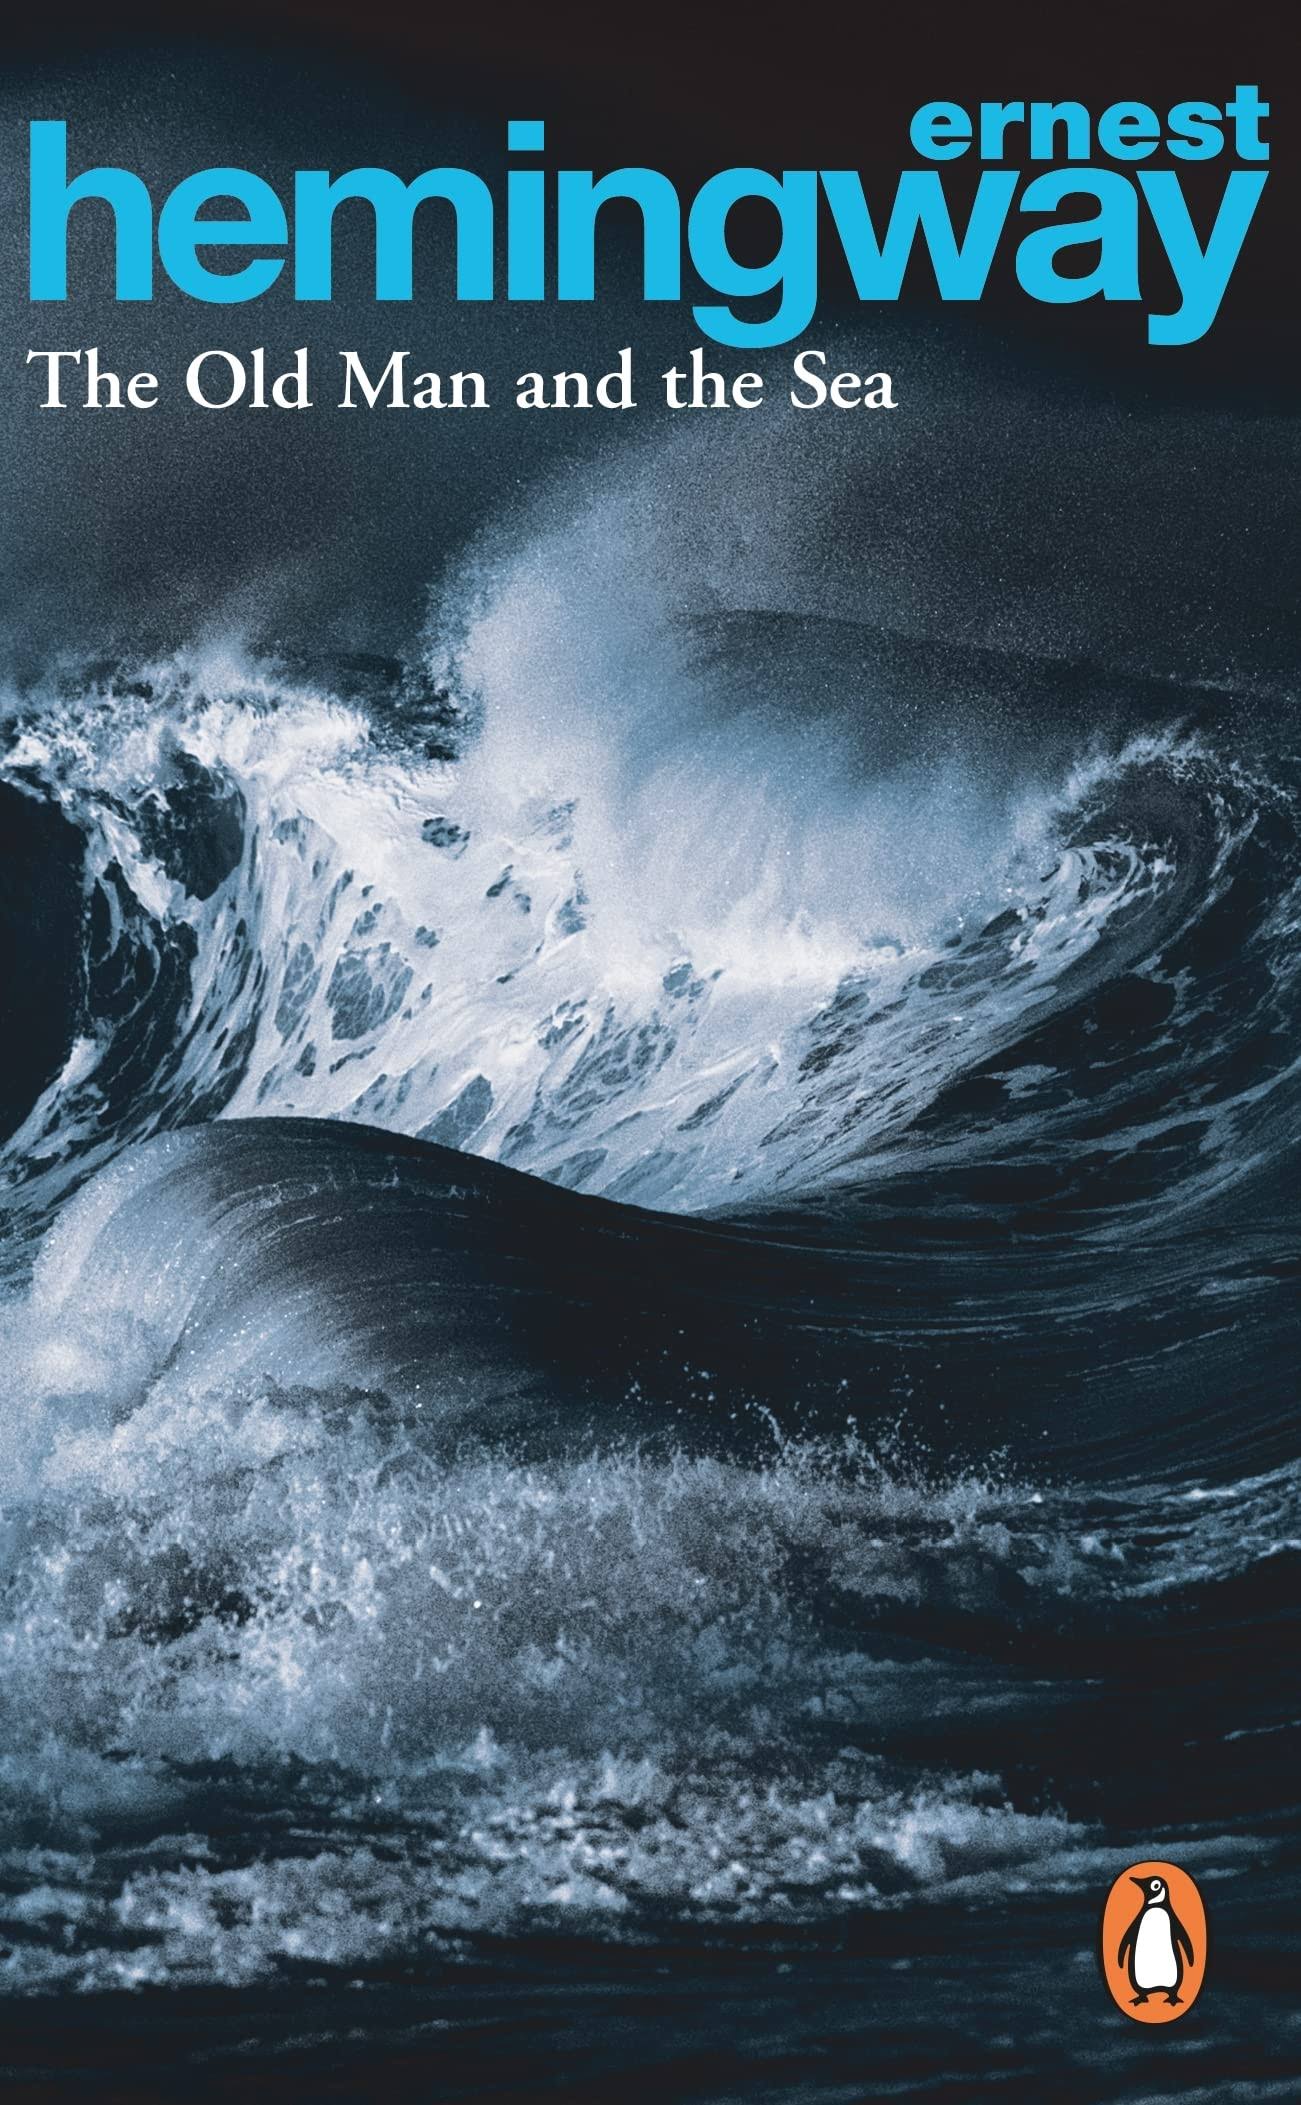 The Old Man and the Sea [Book]